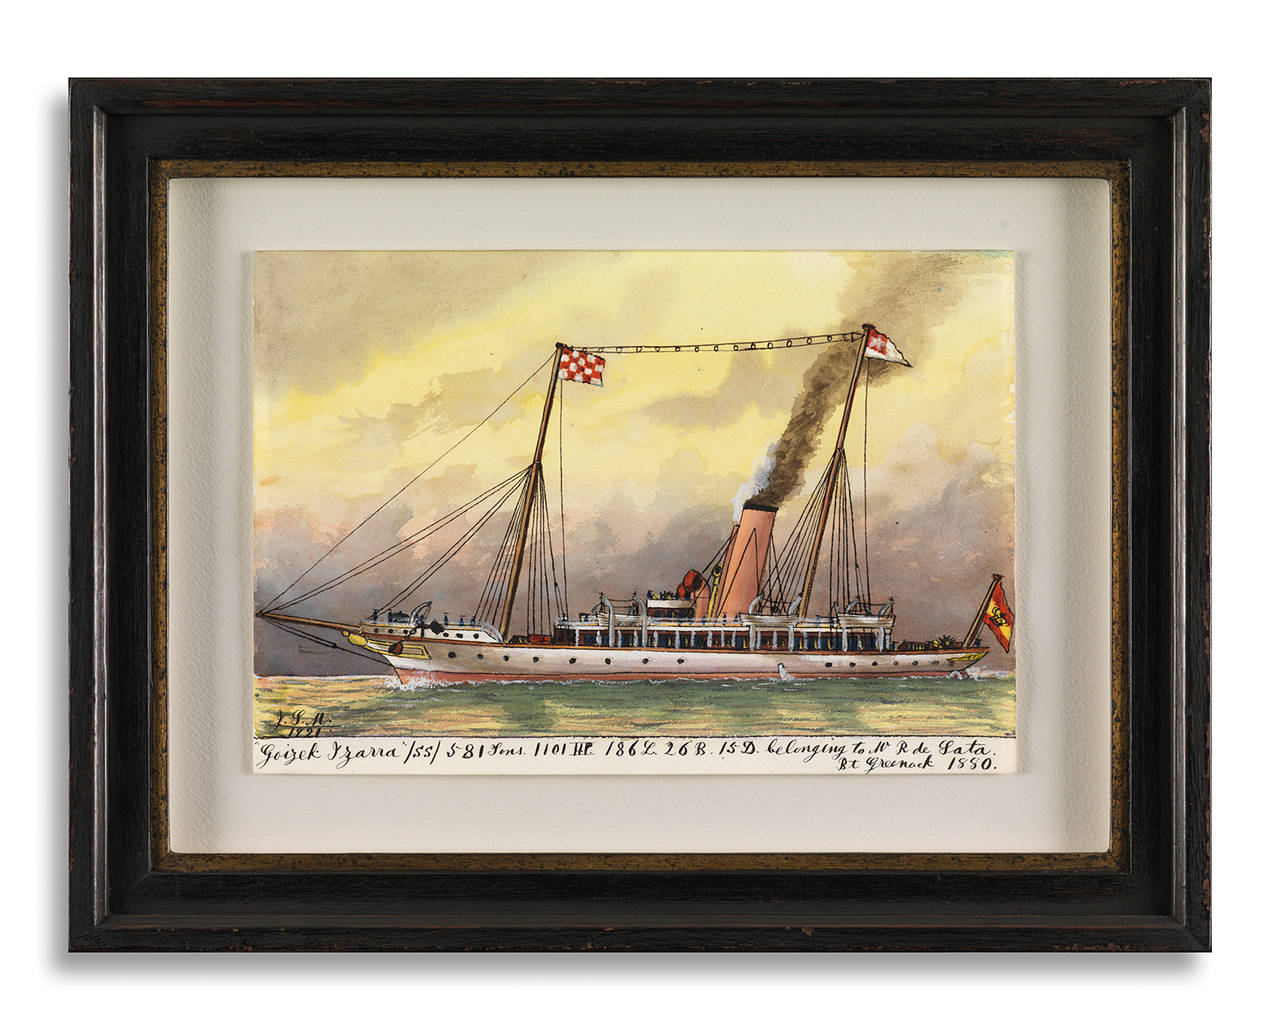 Set of Four Pierhead Ship Paintings
By James Scott Maxwell
Finely detailed pen, ink and watercolour on paper
In bespoke handmade frames,
British, early twentieth century.
11.5